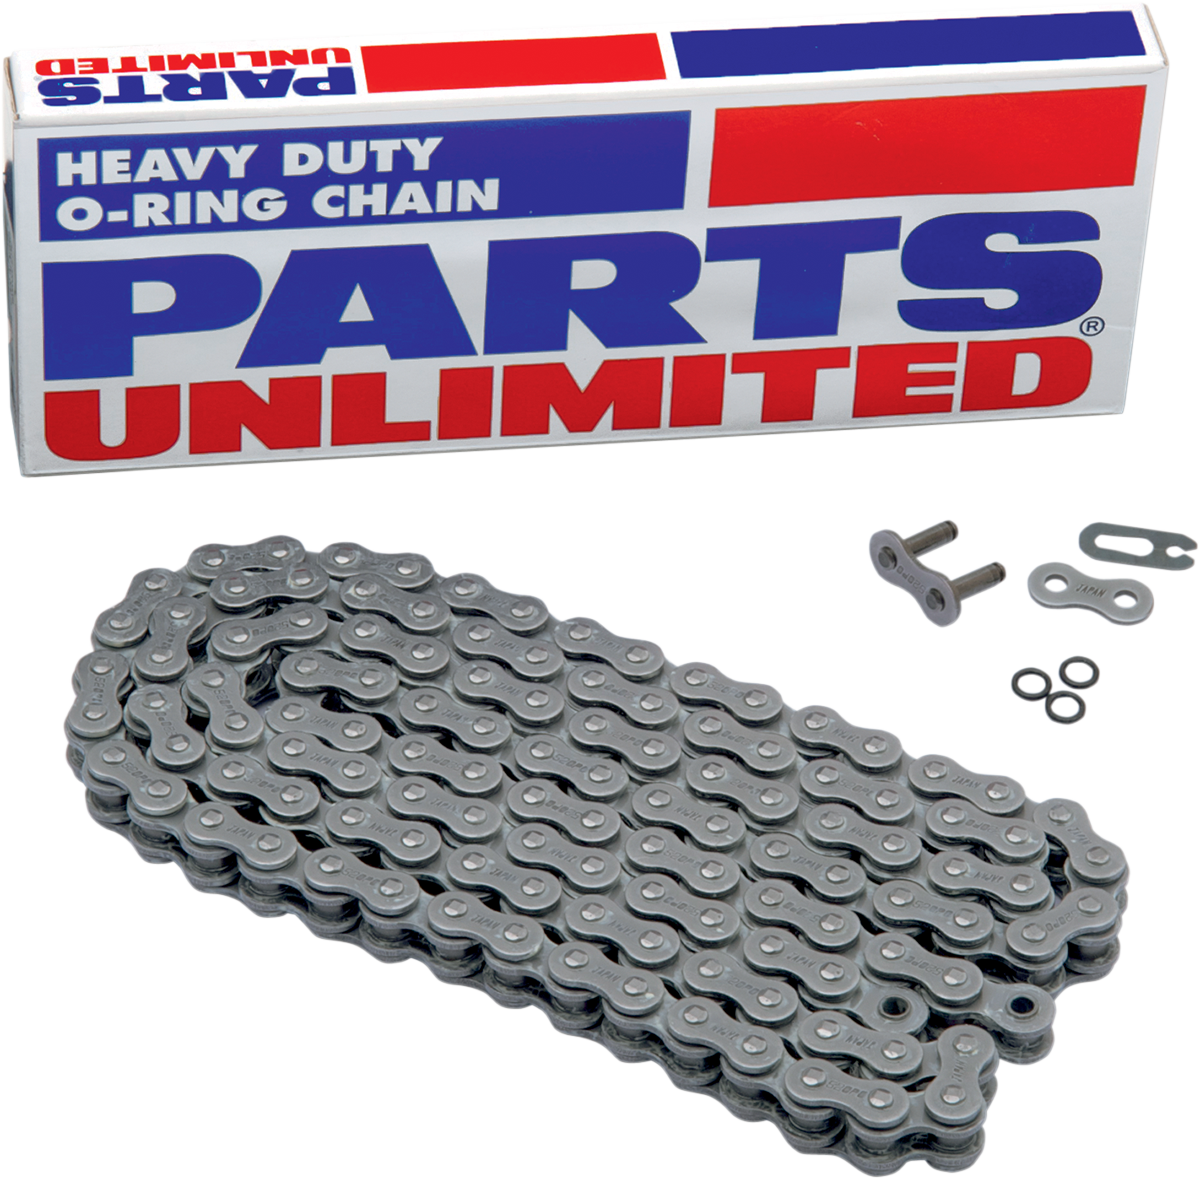 PARTS UNLIMITED-CHAIN MOTORCYCLE CHAIN CHAIN PU 520 O-RING X 90L